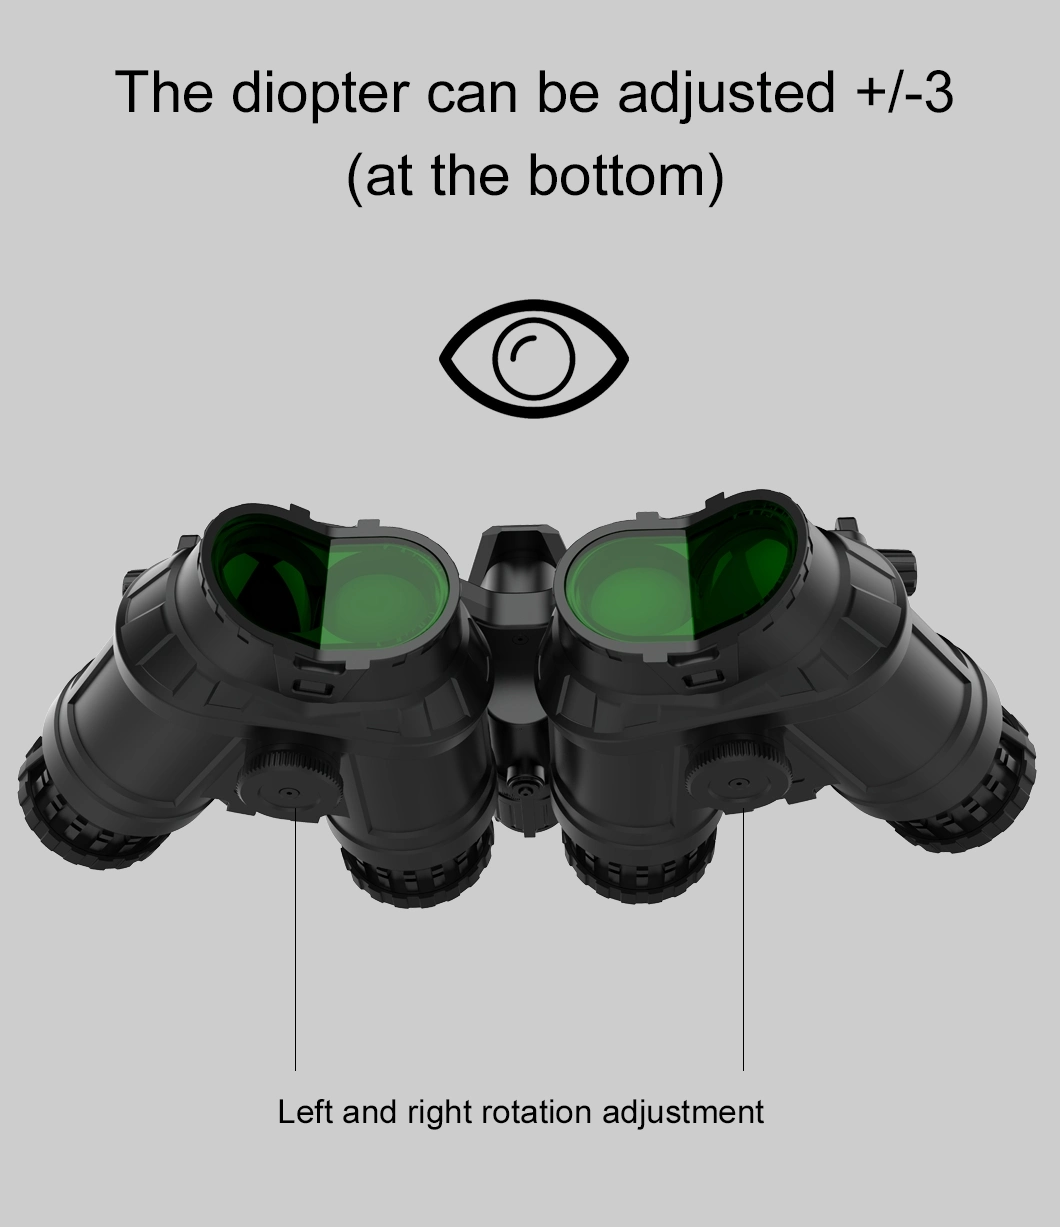 Military Grade Infrared Night Vision Goggles Binoculars for Military Use